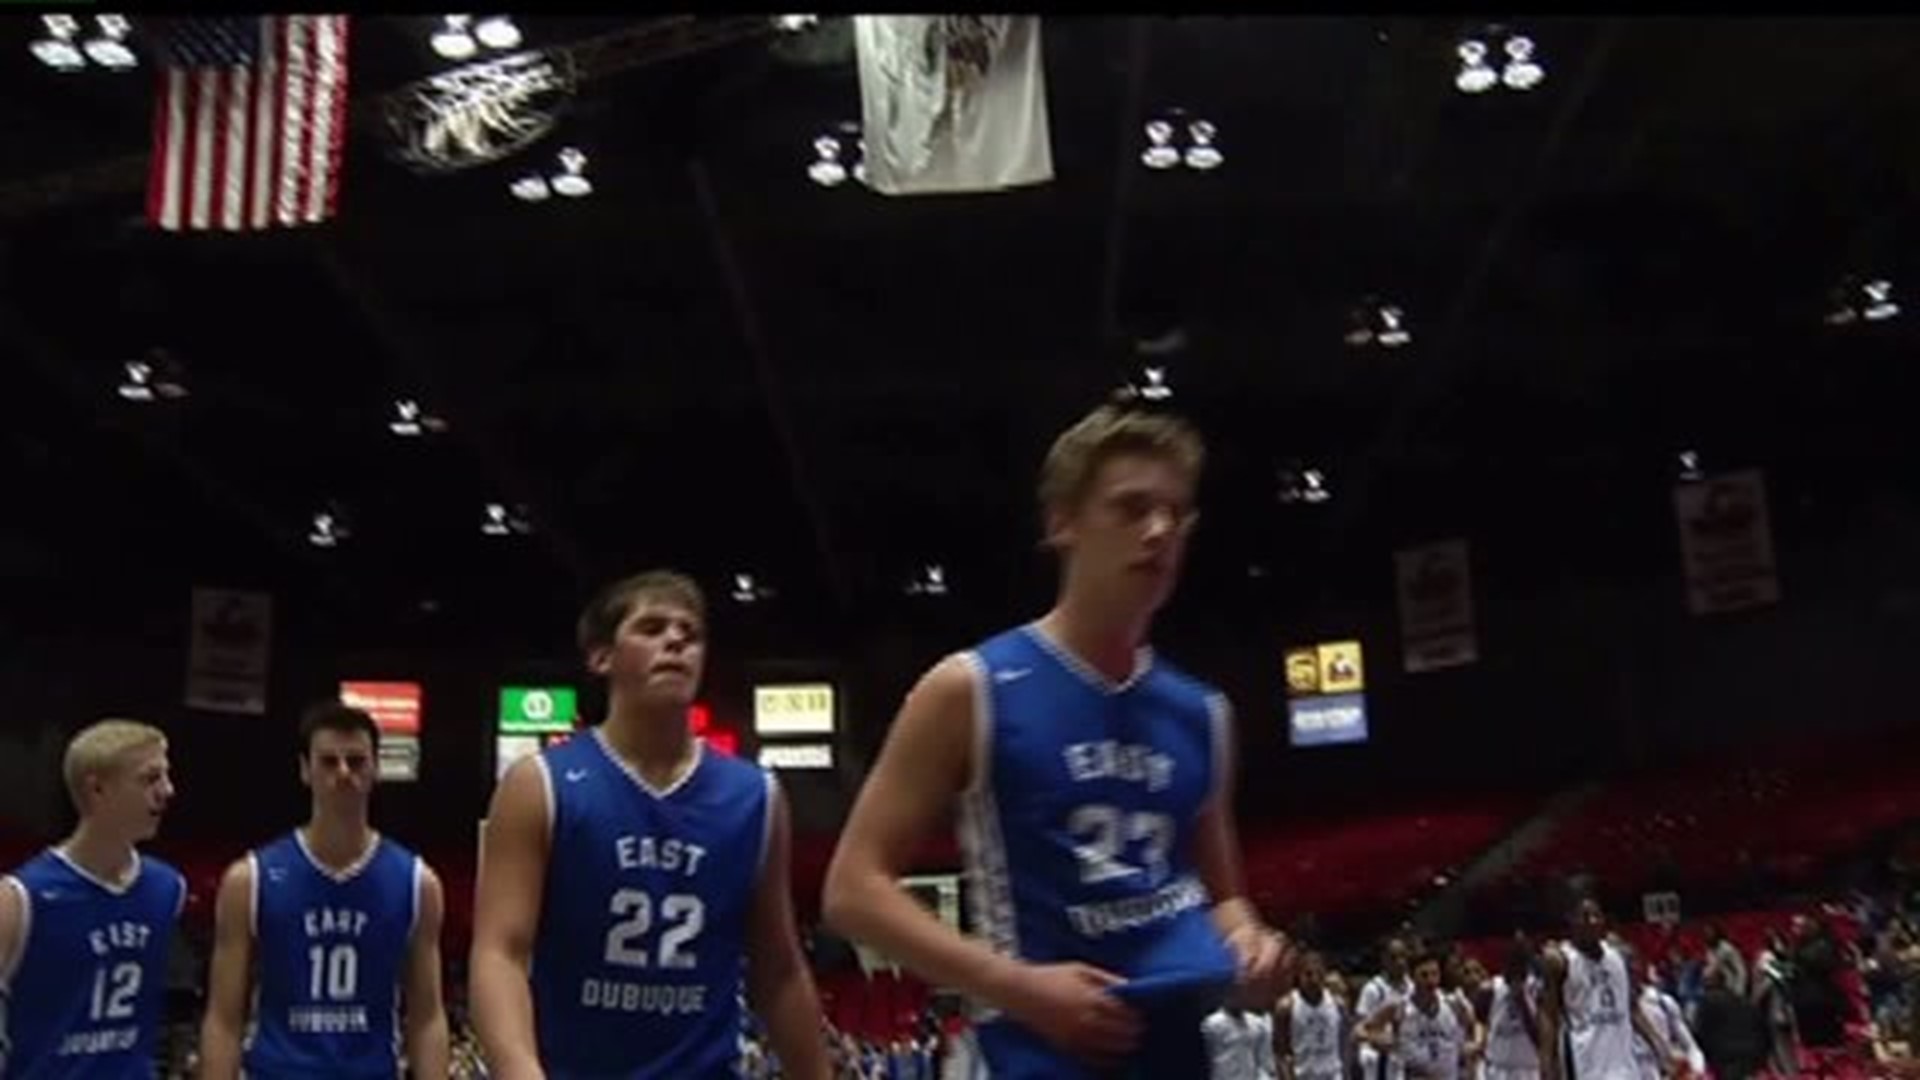 East Dubuque ends historic season in the Elite 8